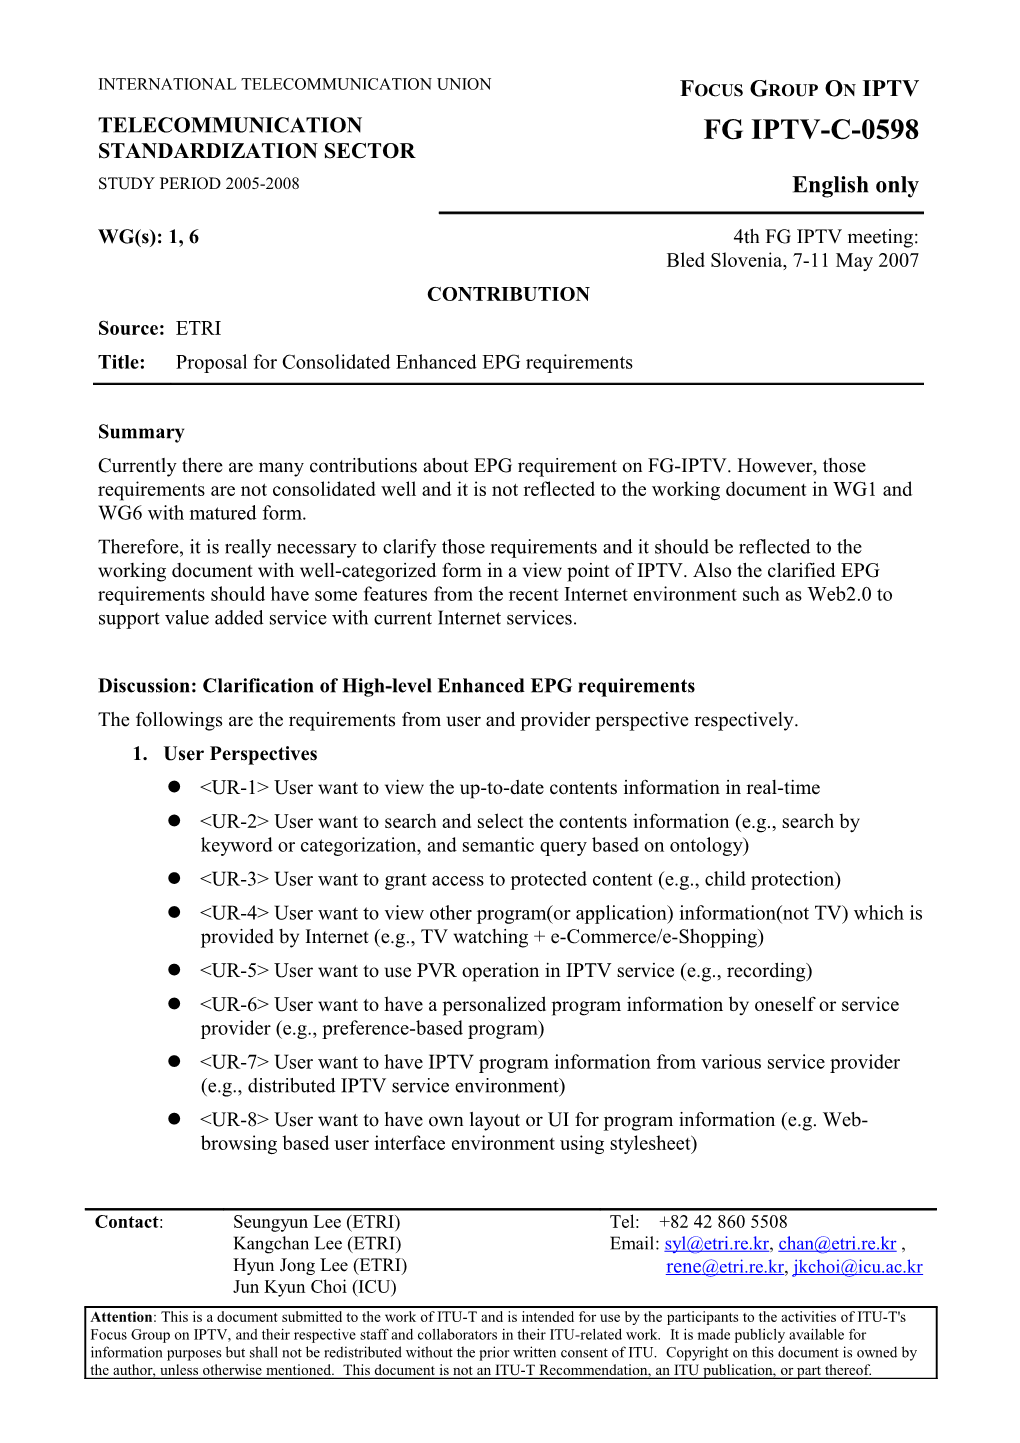 Discussion: Clarification of High-Level Enhanced EPG Requirements